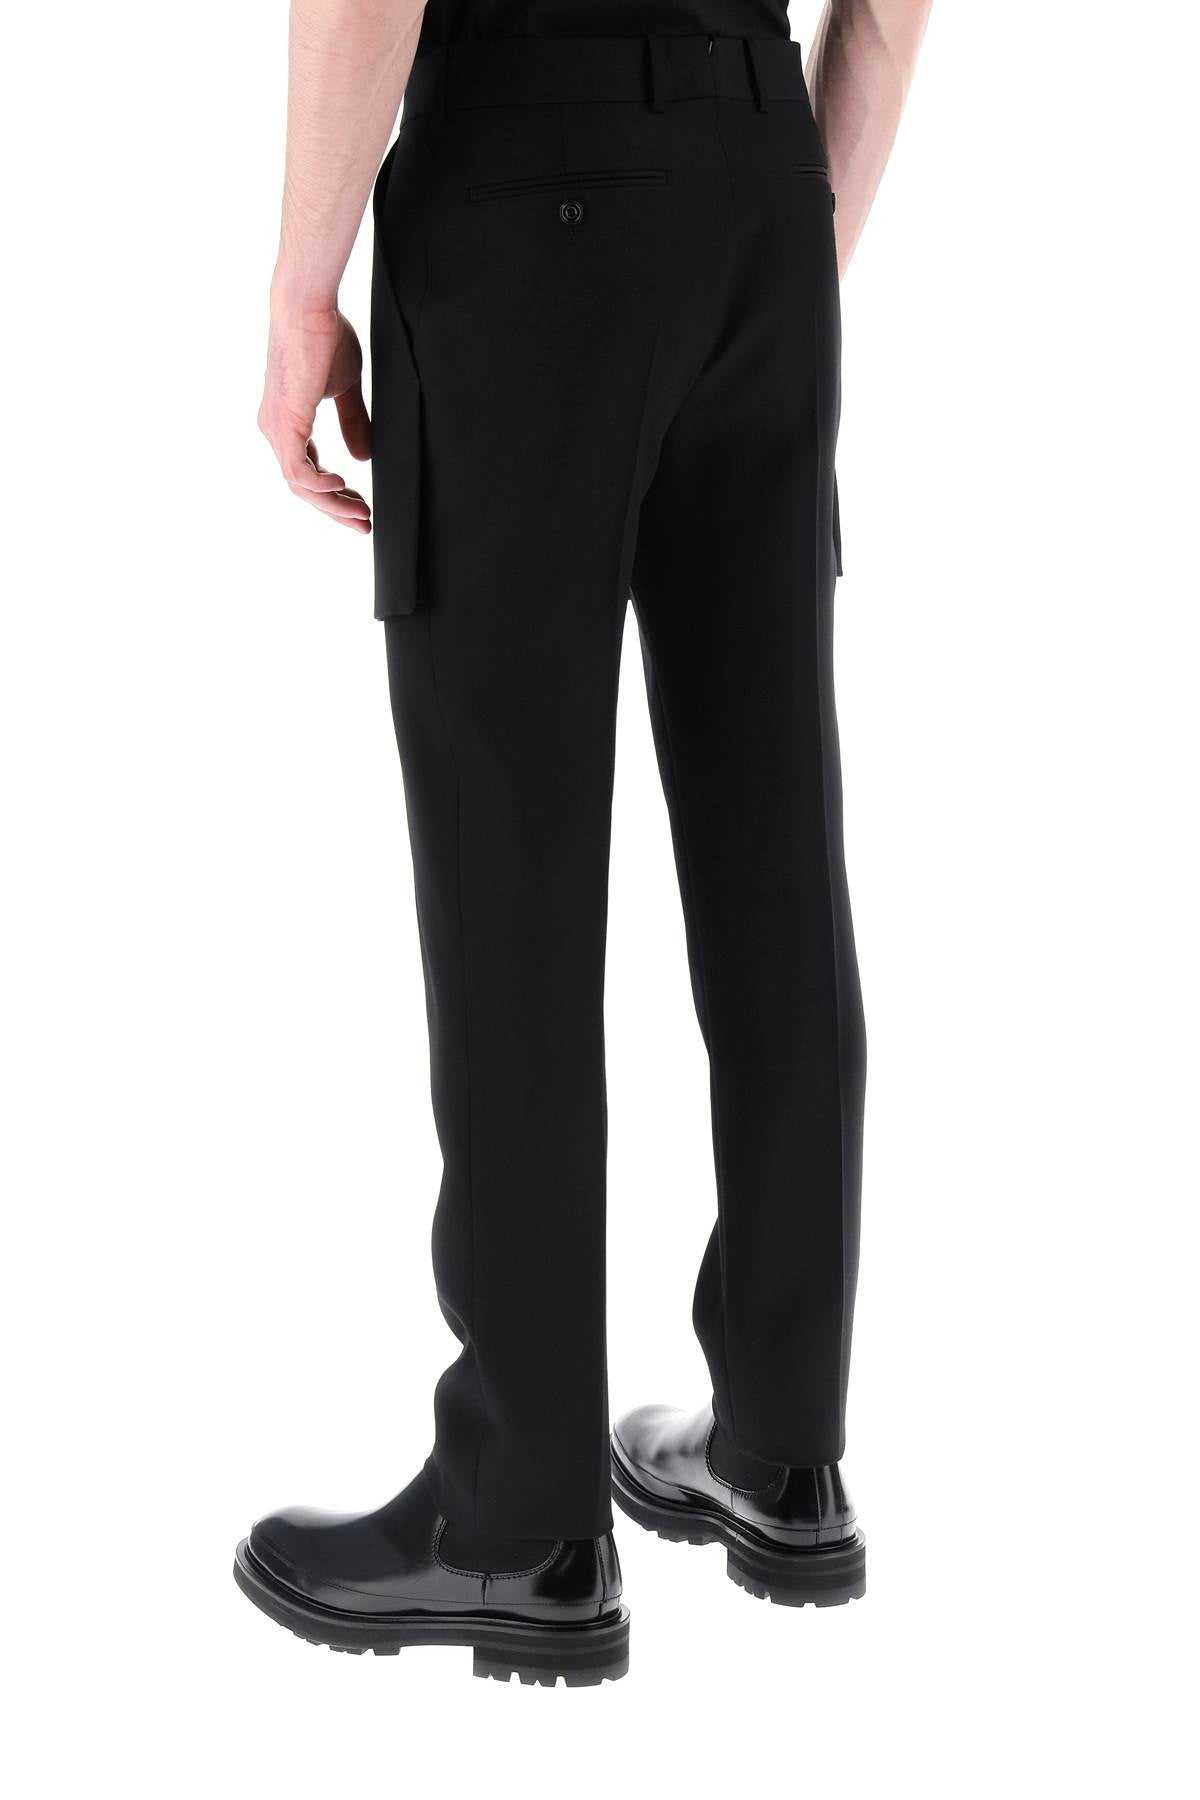 ALEXANDER MCQUEEN Sophisticated Mid-Waisted Tailored Trousers for Men in Classic Khaki